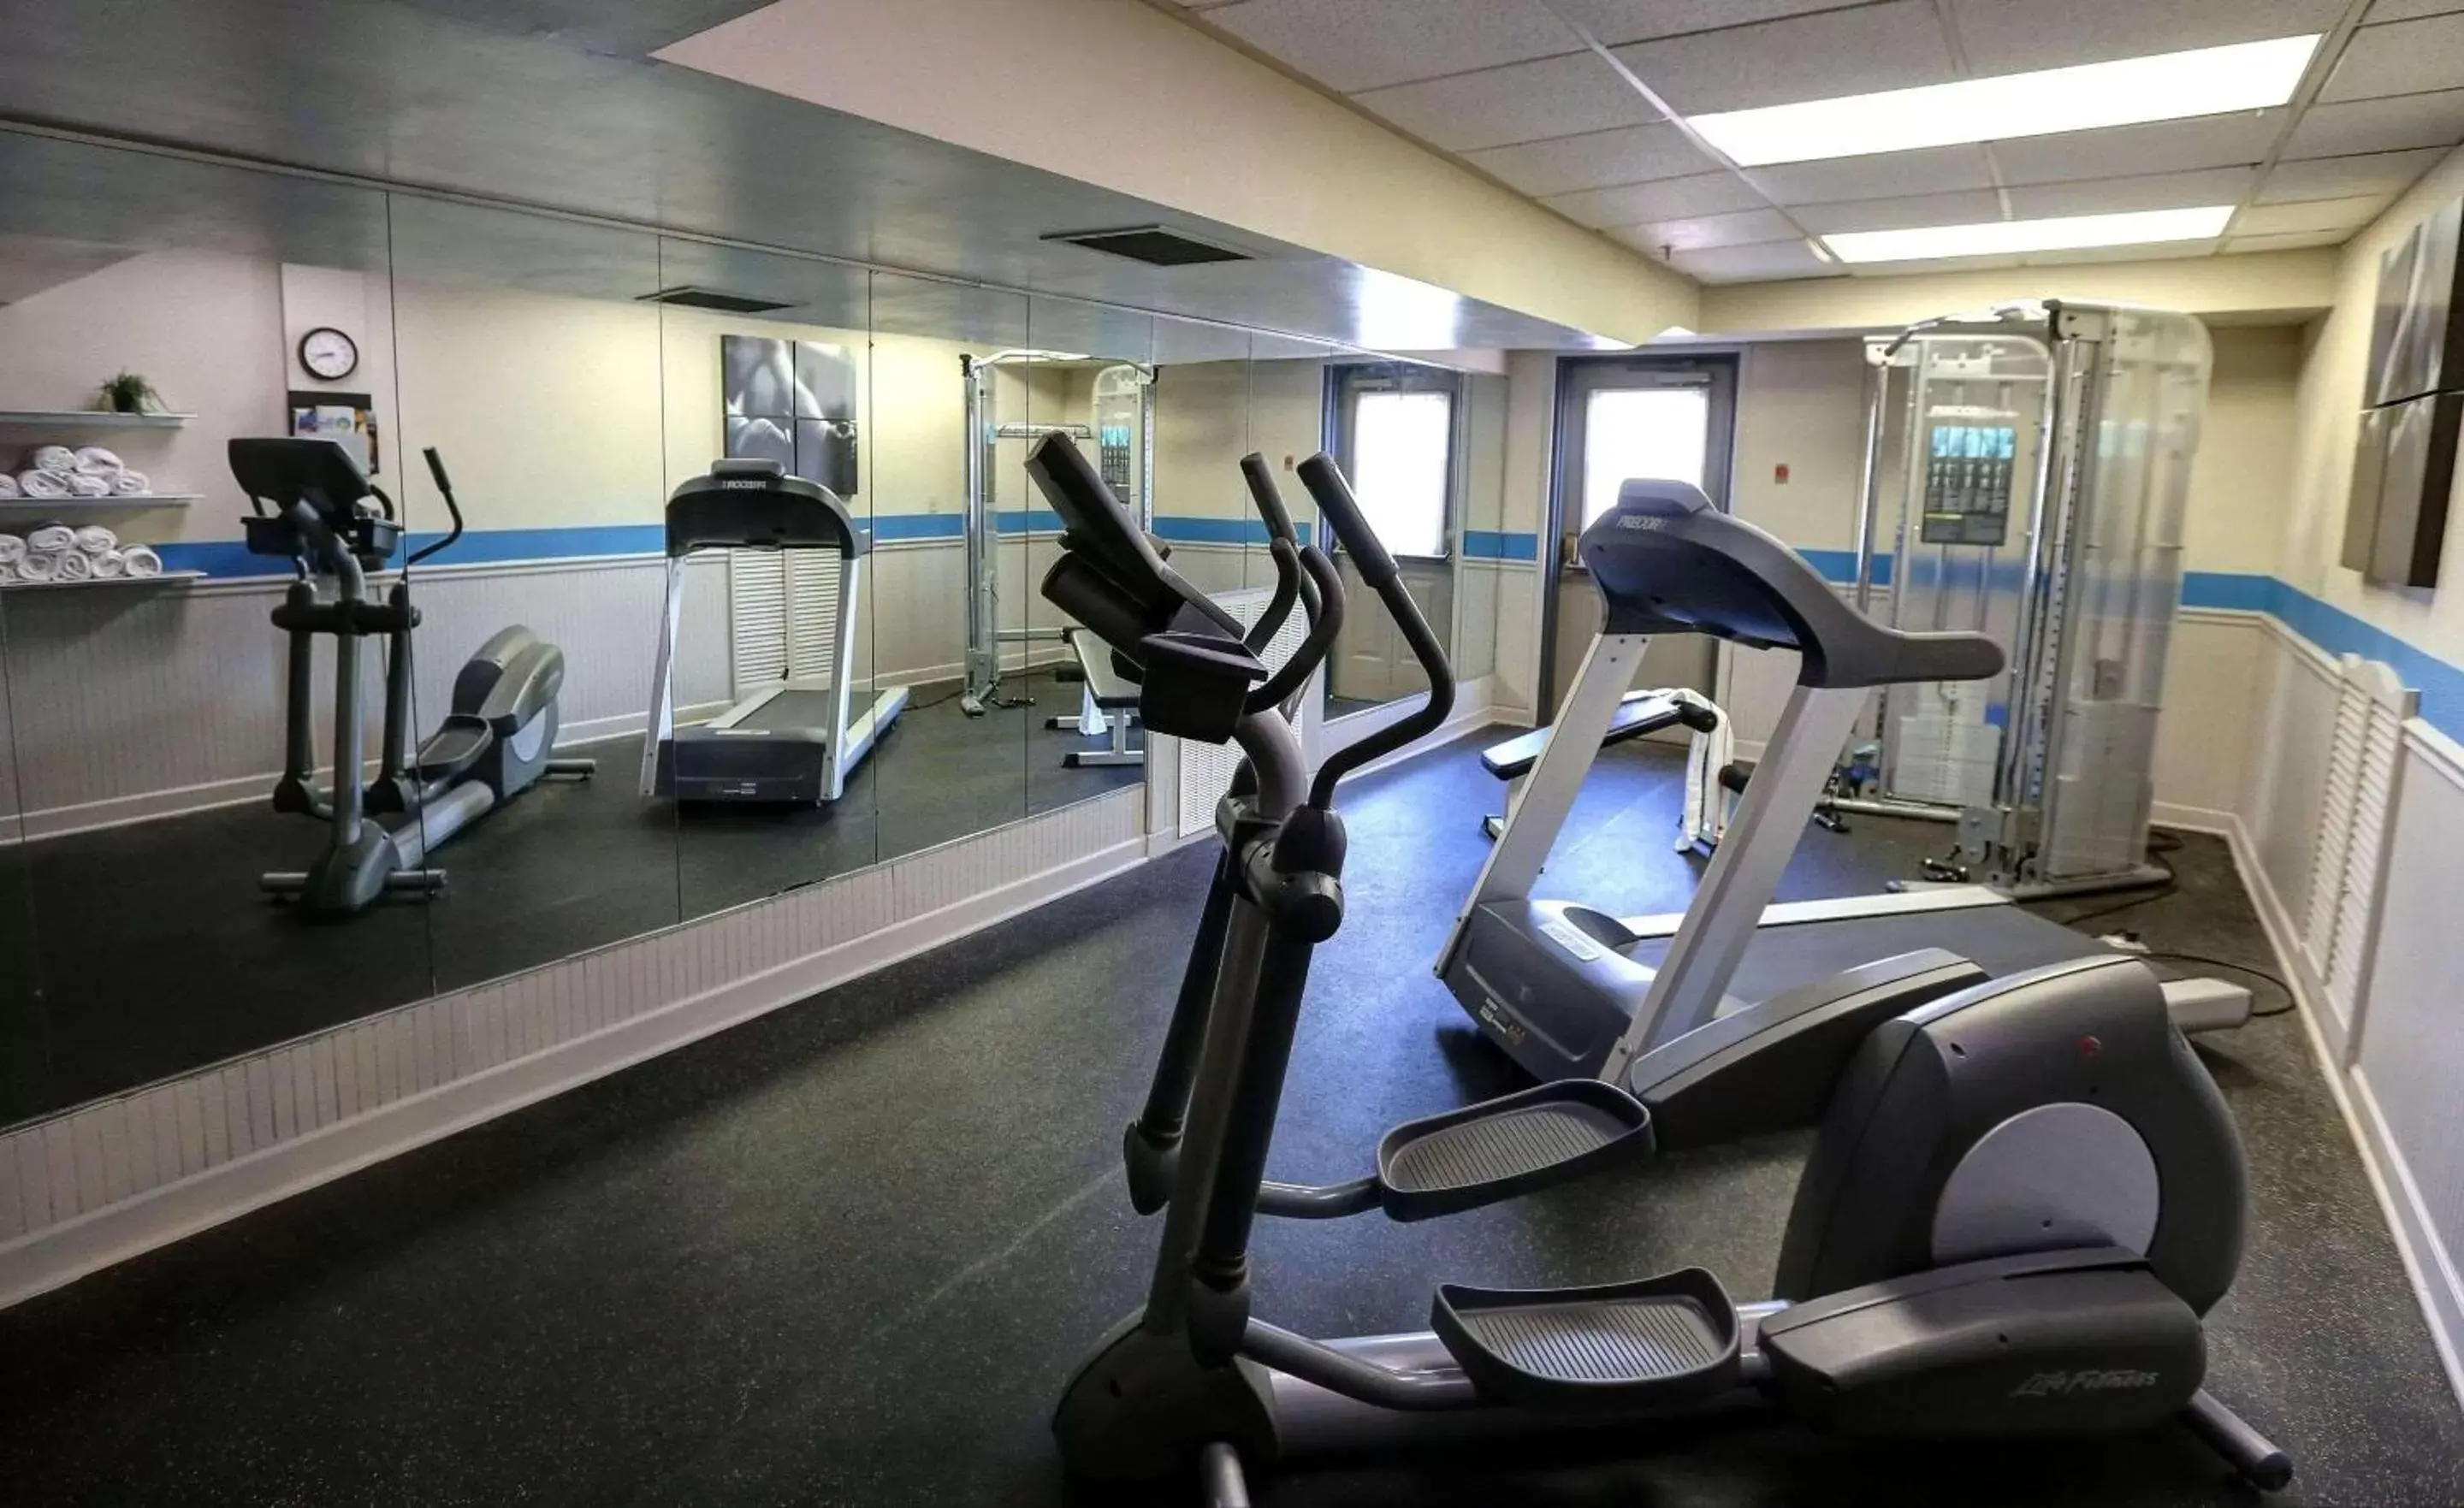 Fitness centre/facilities, Fitness Center/Facilities in Country Inn & Suites by Radisson, Charlotte I-85 Airport, NC